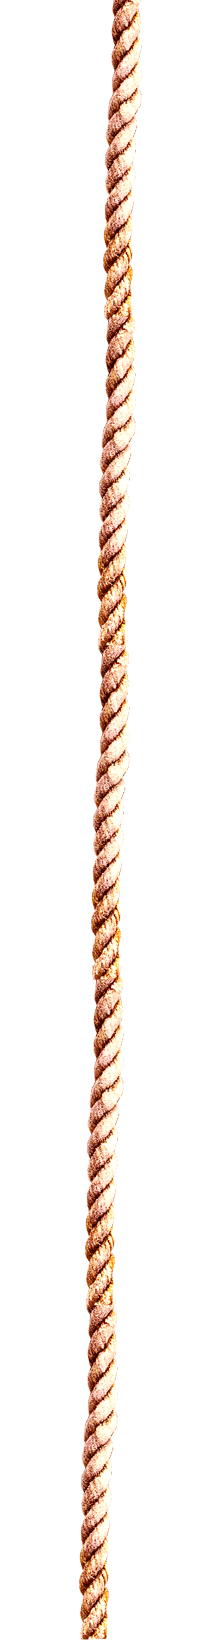 Rope Png PNG images